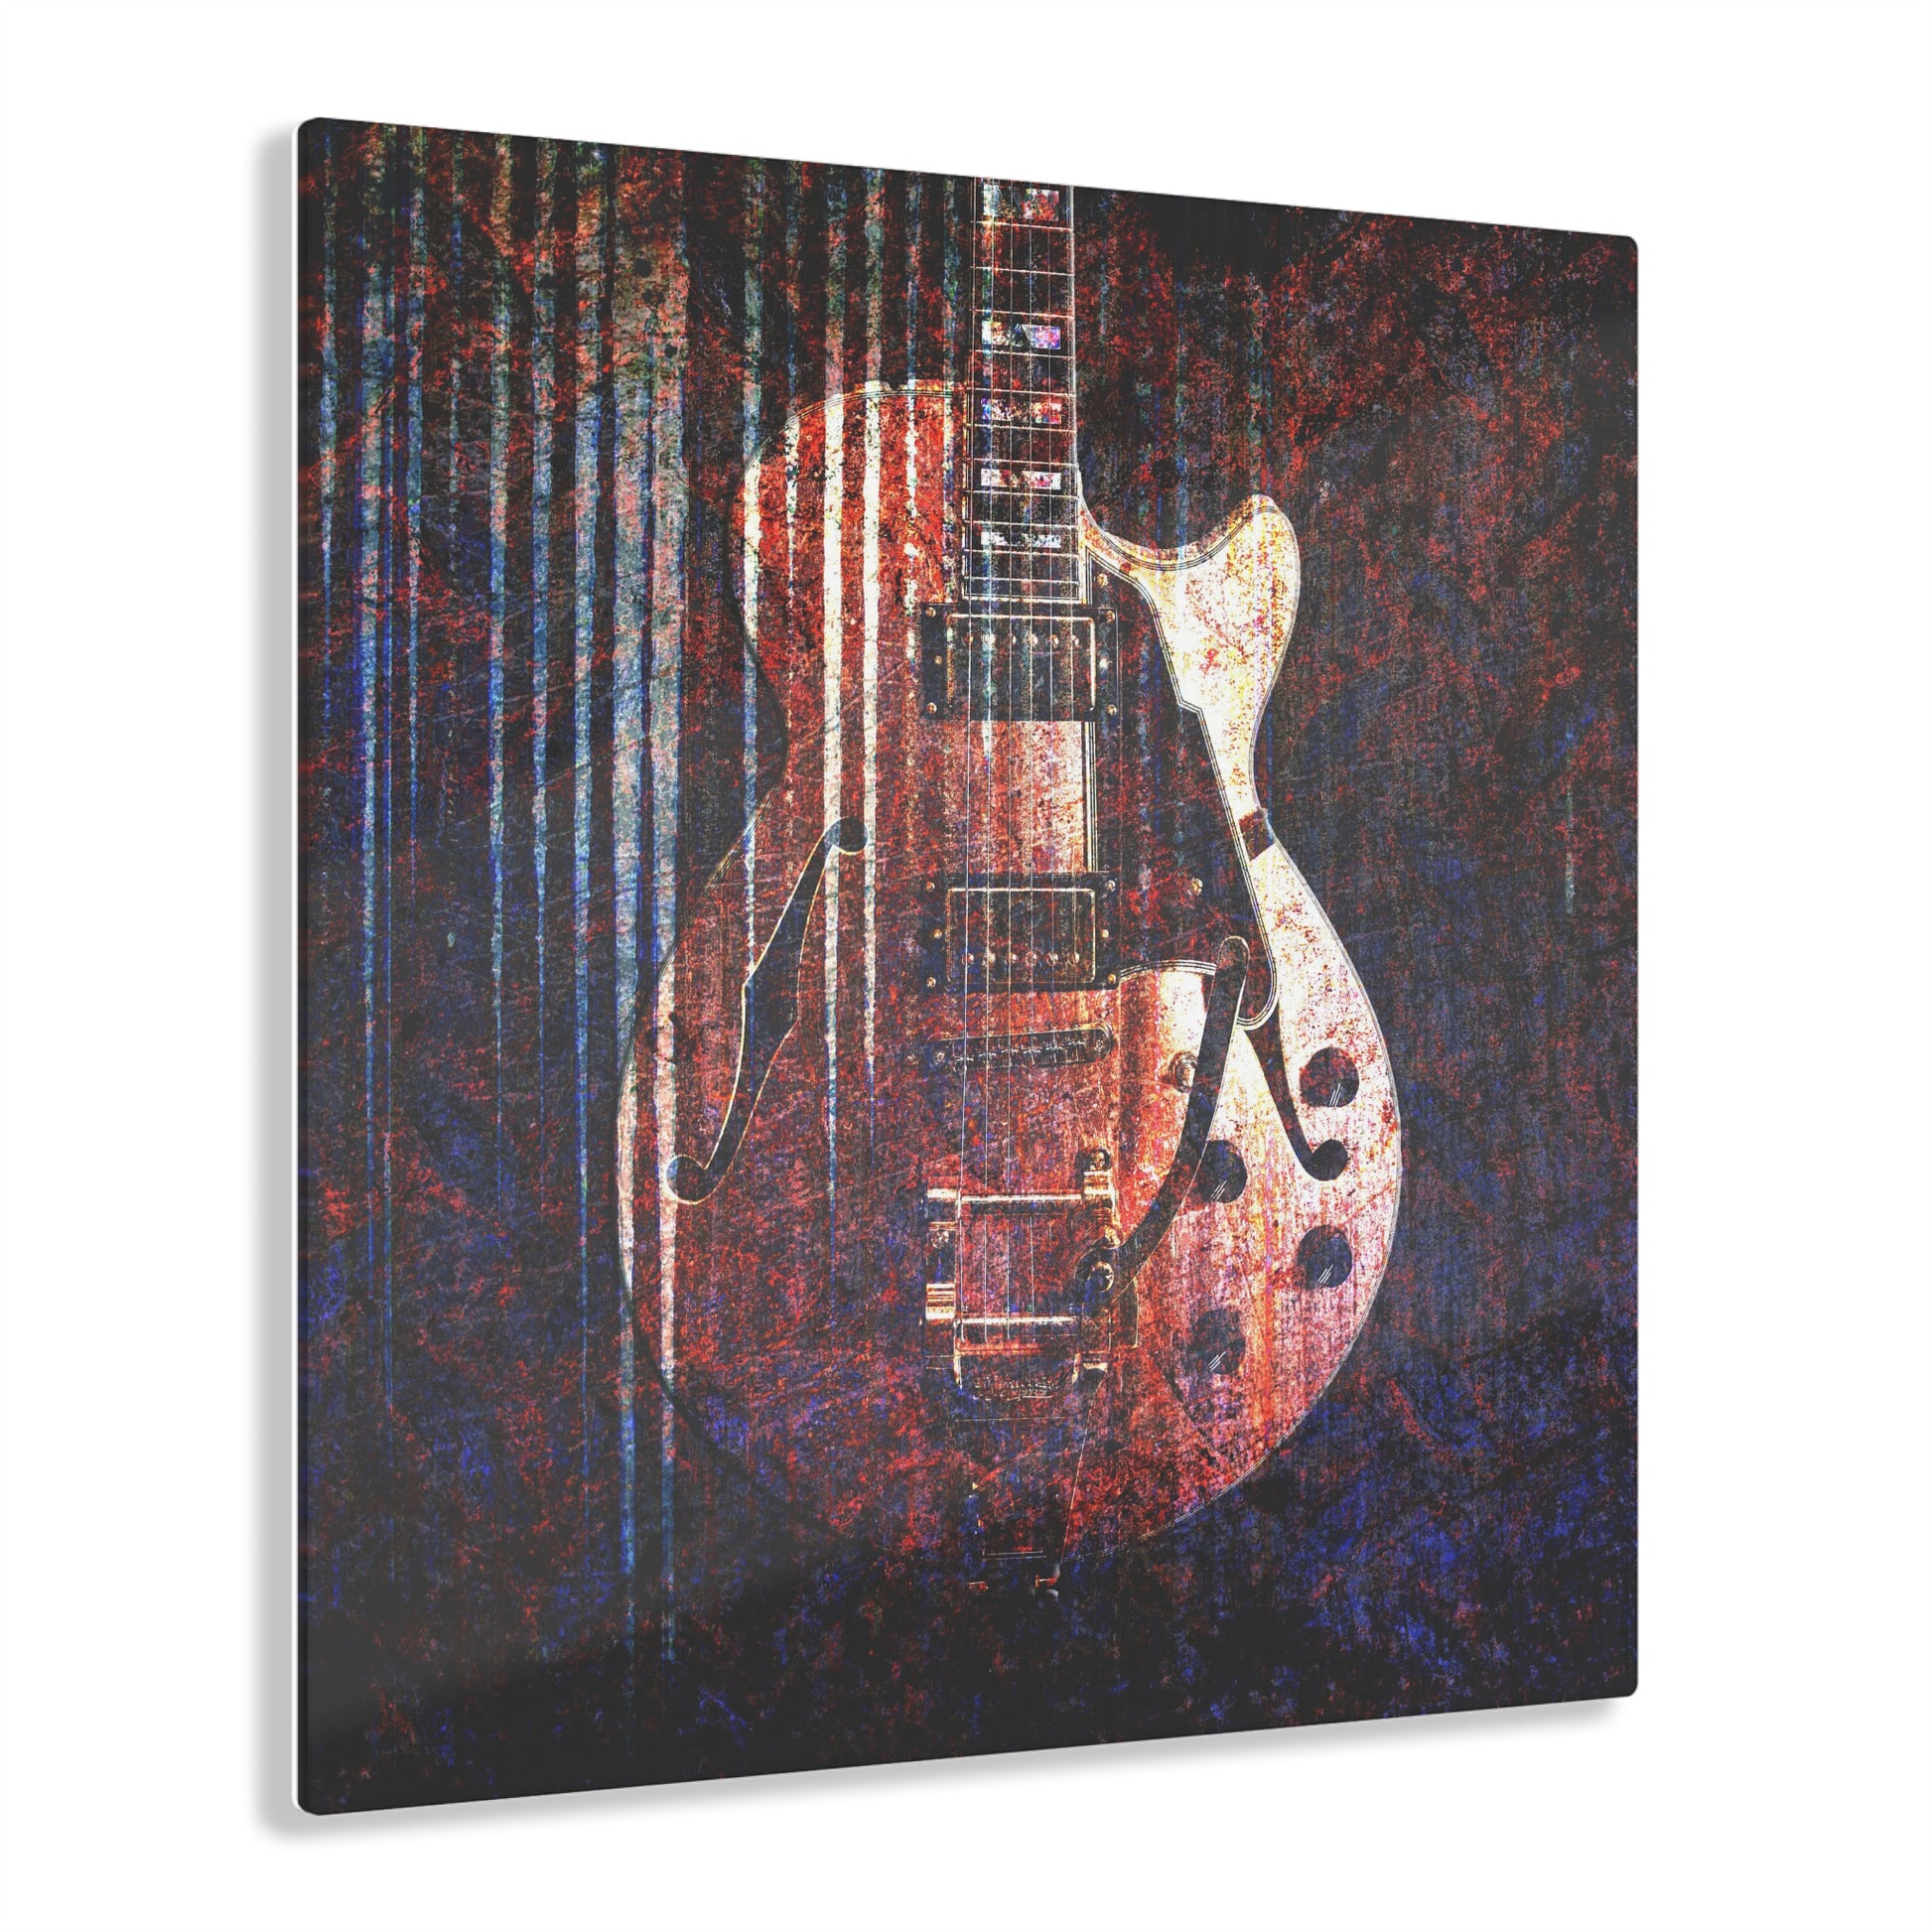 Music and Guitar Wall Decor - Electric Guitar Grunge Red and Blue Filters Printed on an Acrylic Panel